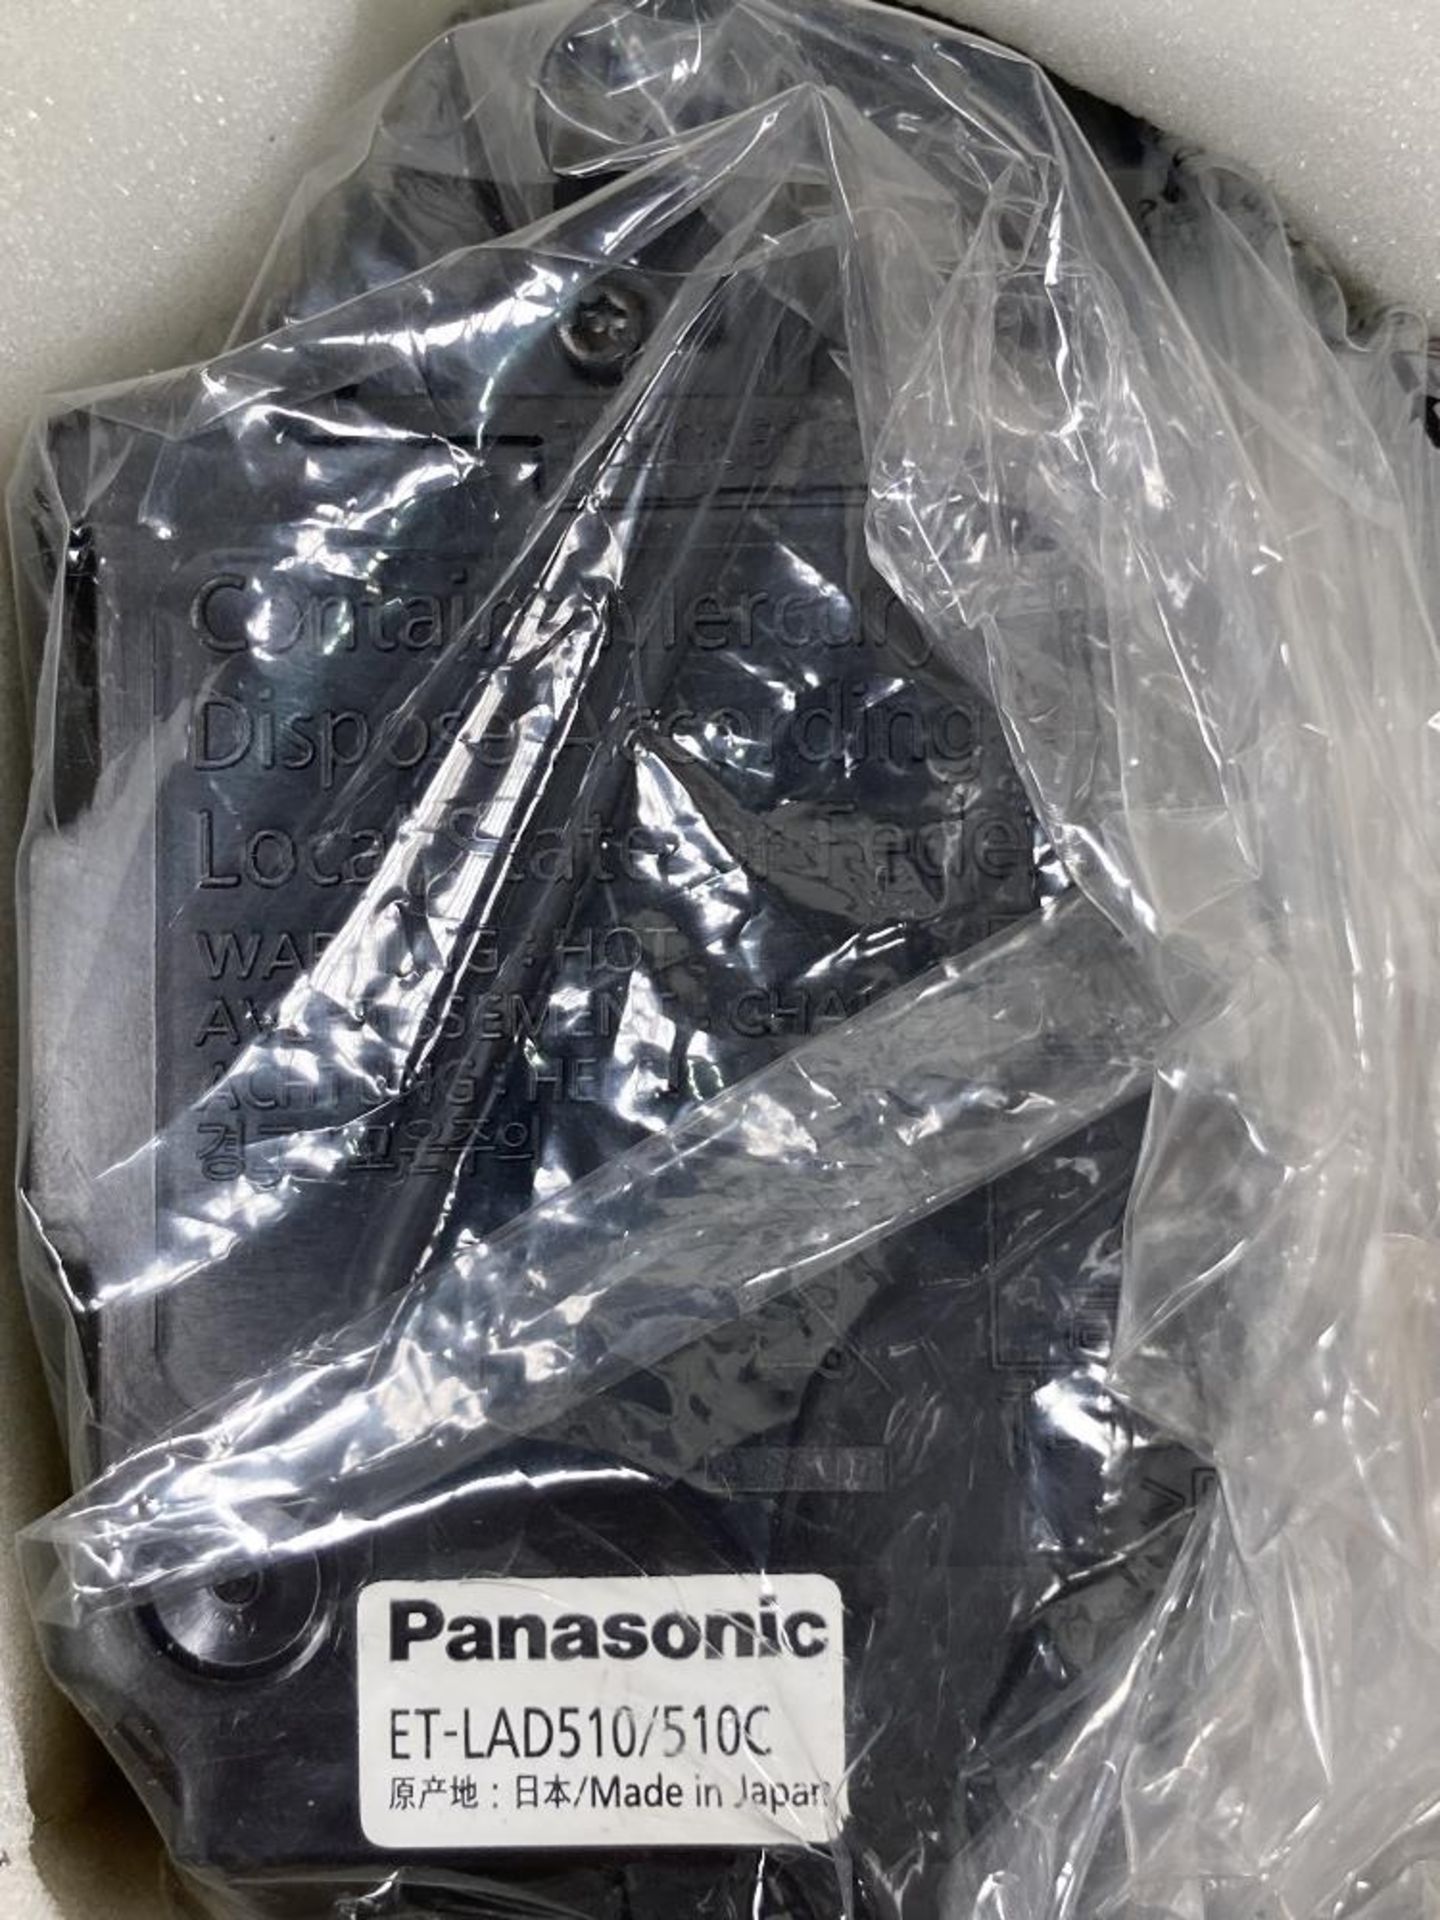 Quantity of Panasonic Projector Spares & (2) Projection Lens to Include - Image 25 of 36